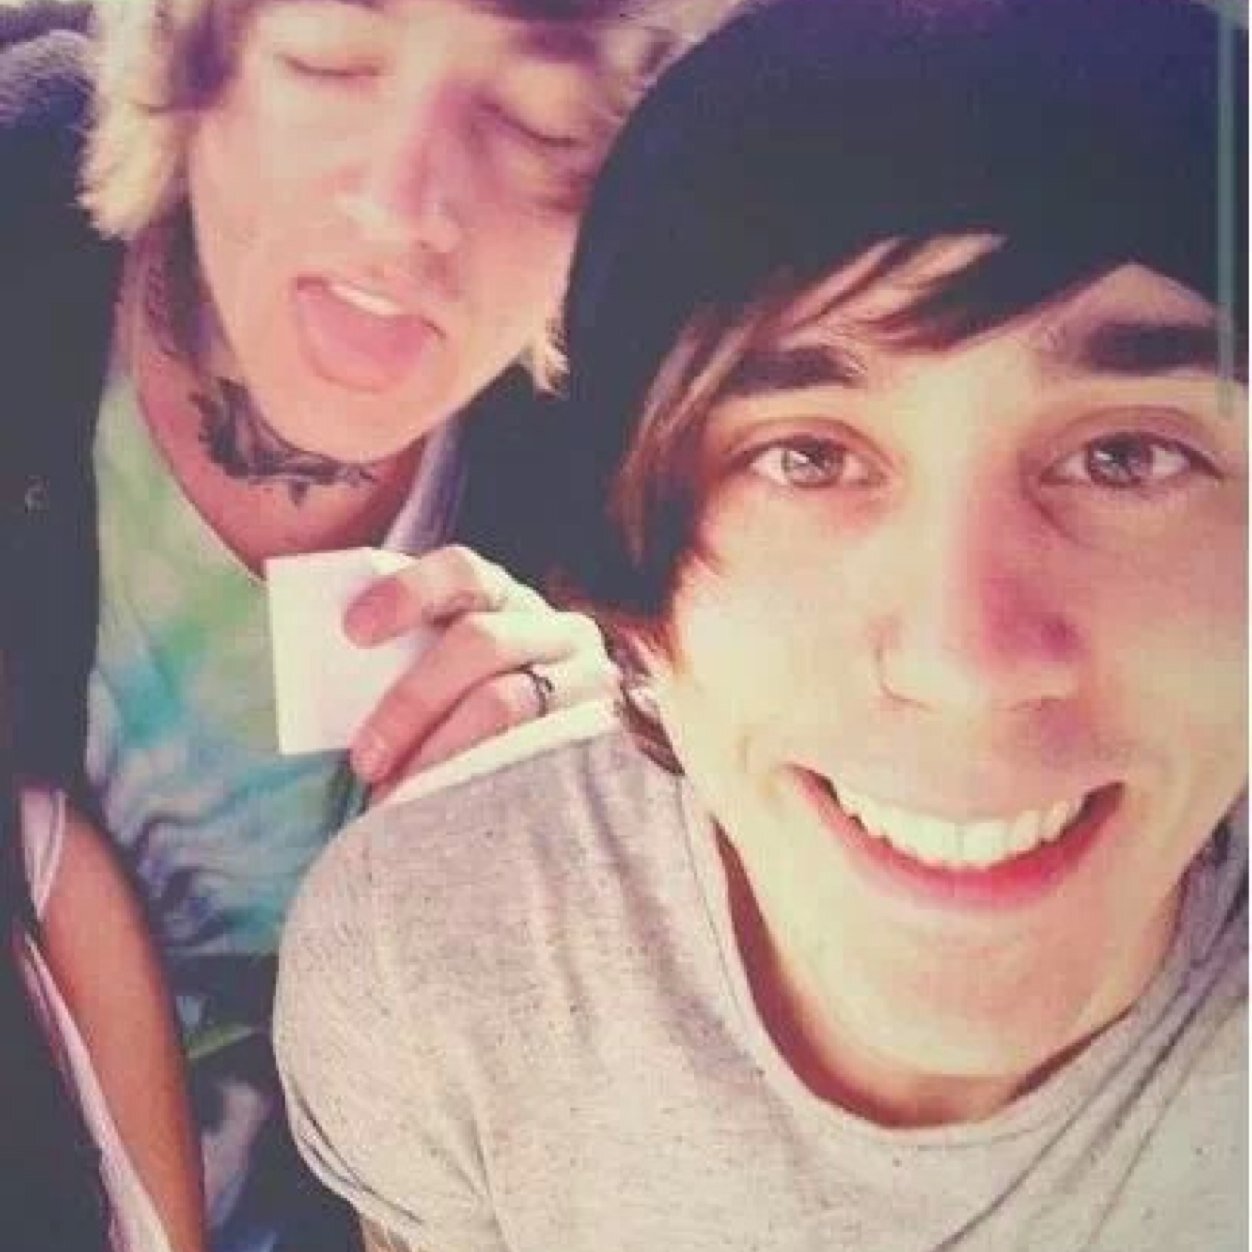 This is fan account to support the wonderful @dakotawint and @johnnyhanel! We follow back! #StayHappyStayWeird (Run by: @coughitout)